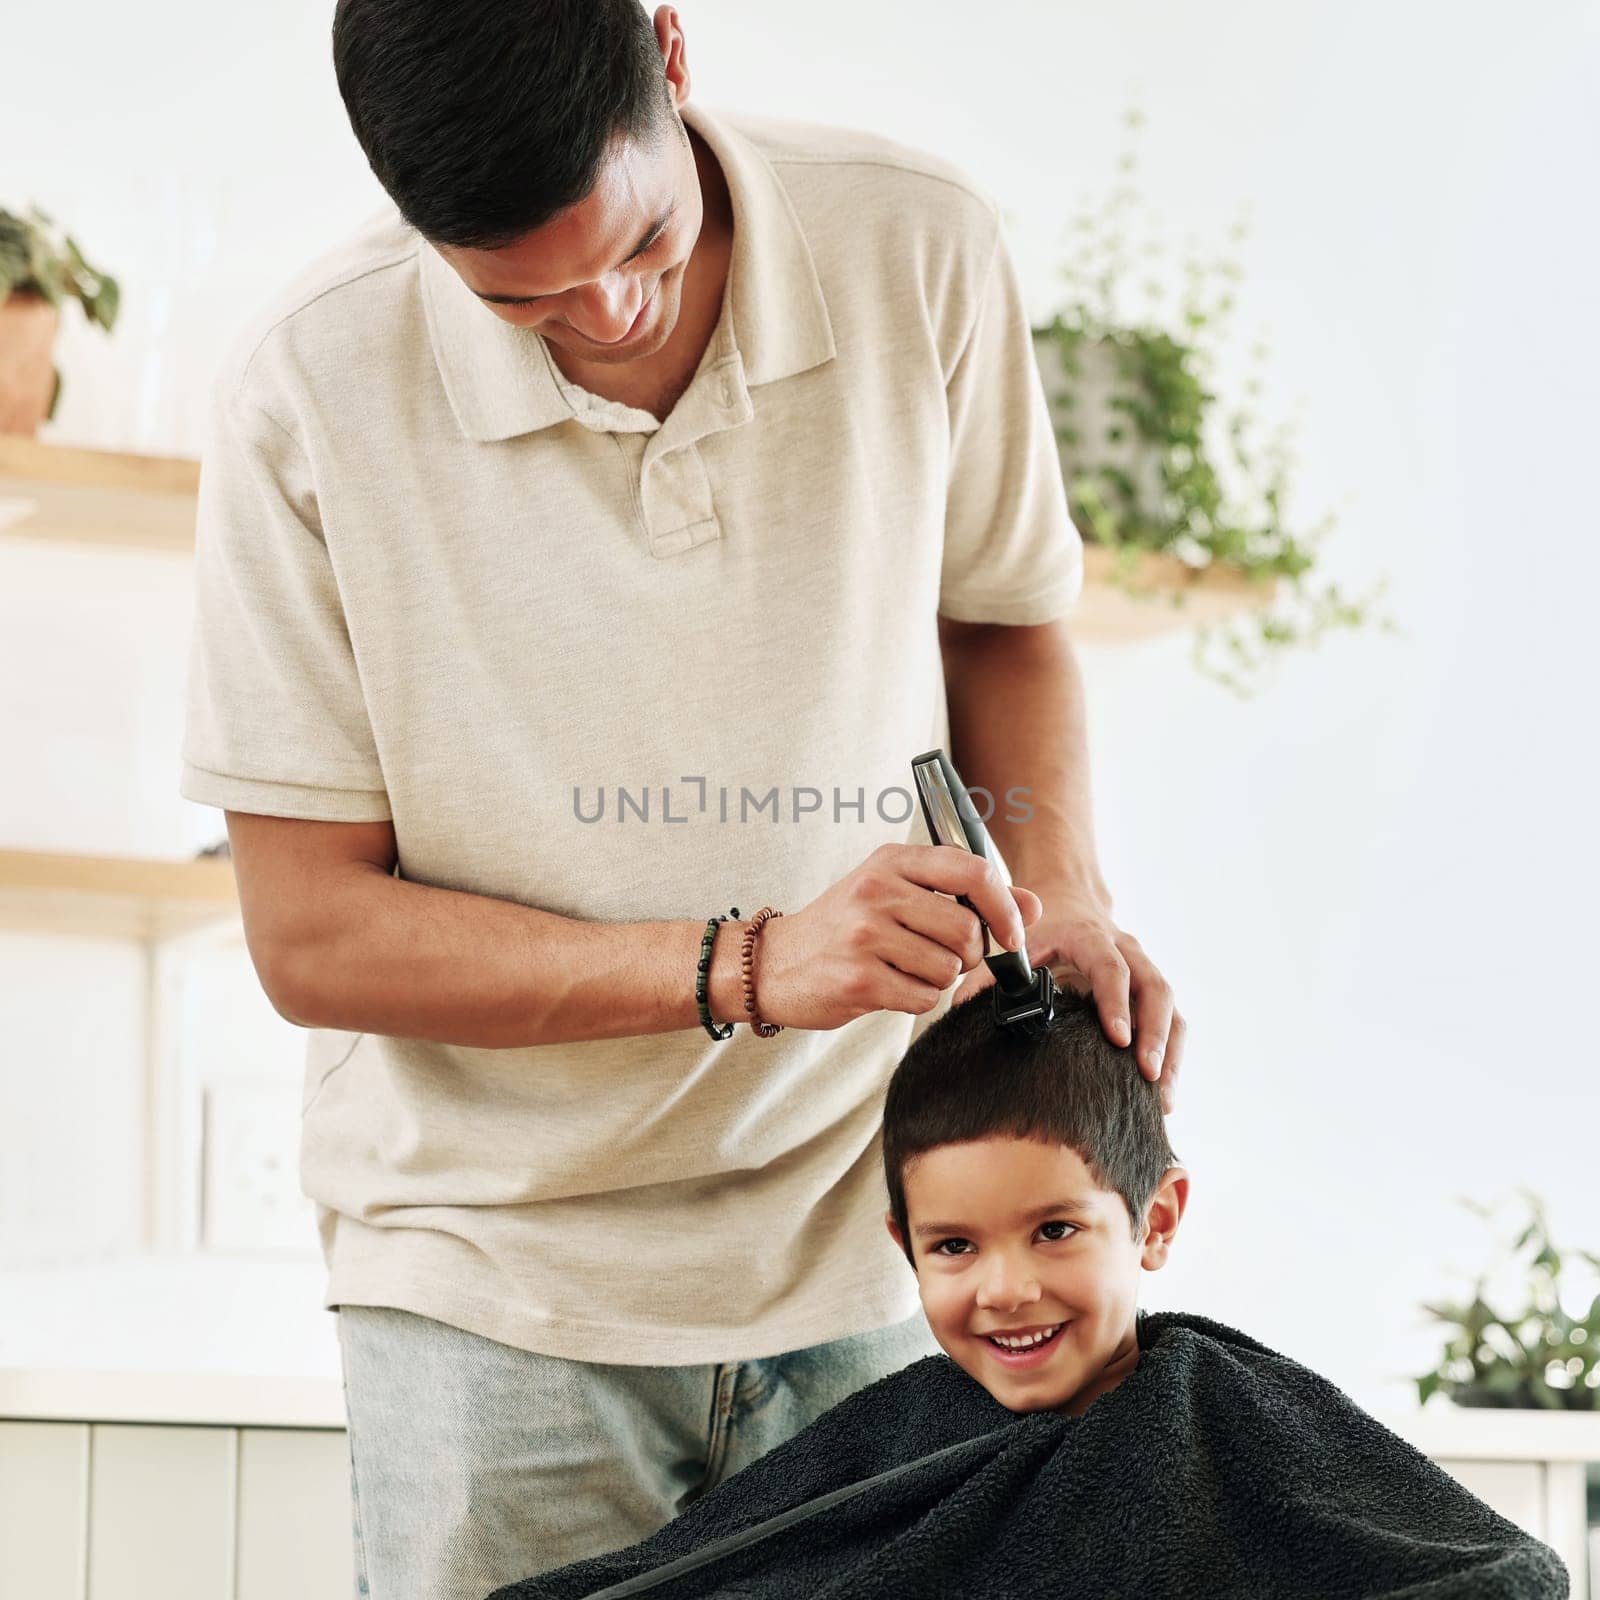 Family, children and haircut with a father shaving the hair of his son together in the home for grooming. Kids, barber and hairstyle with a man cutting the head of his son as a hairdresser in a house.